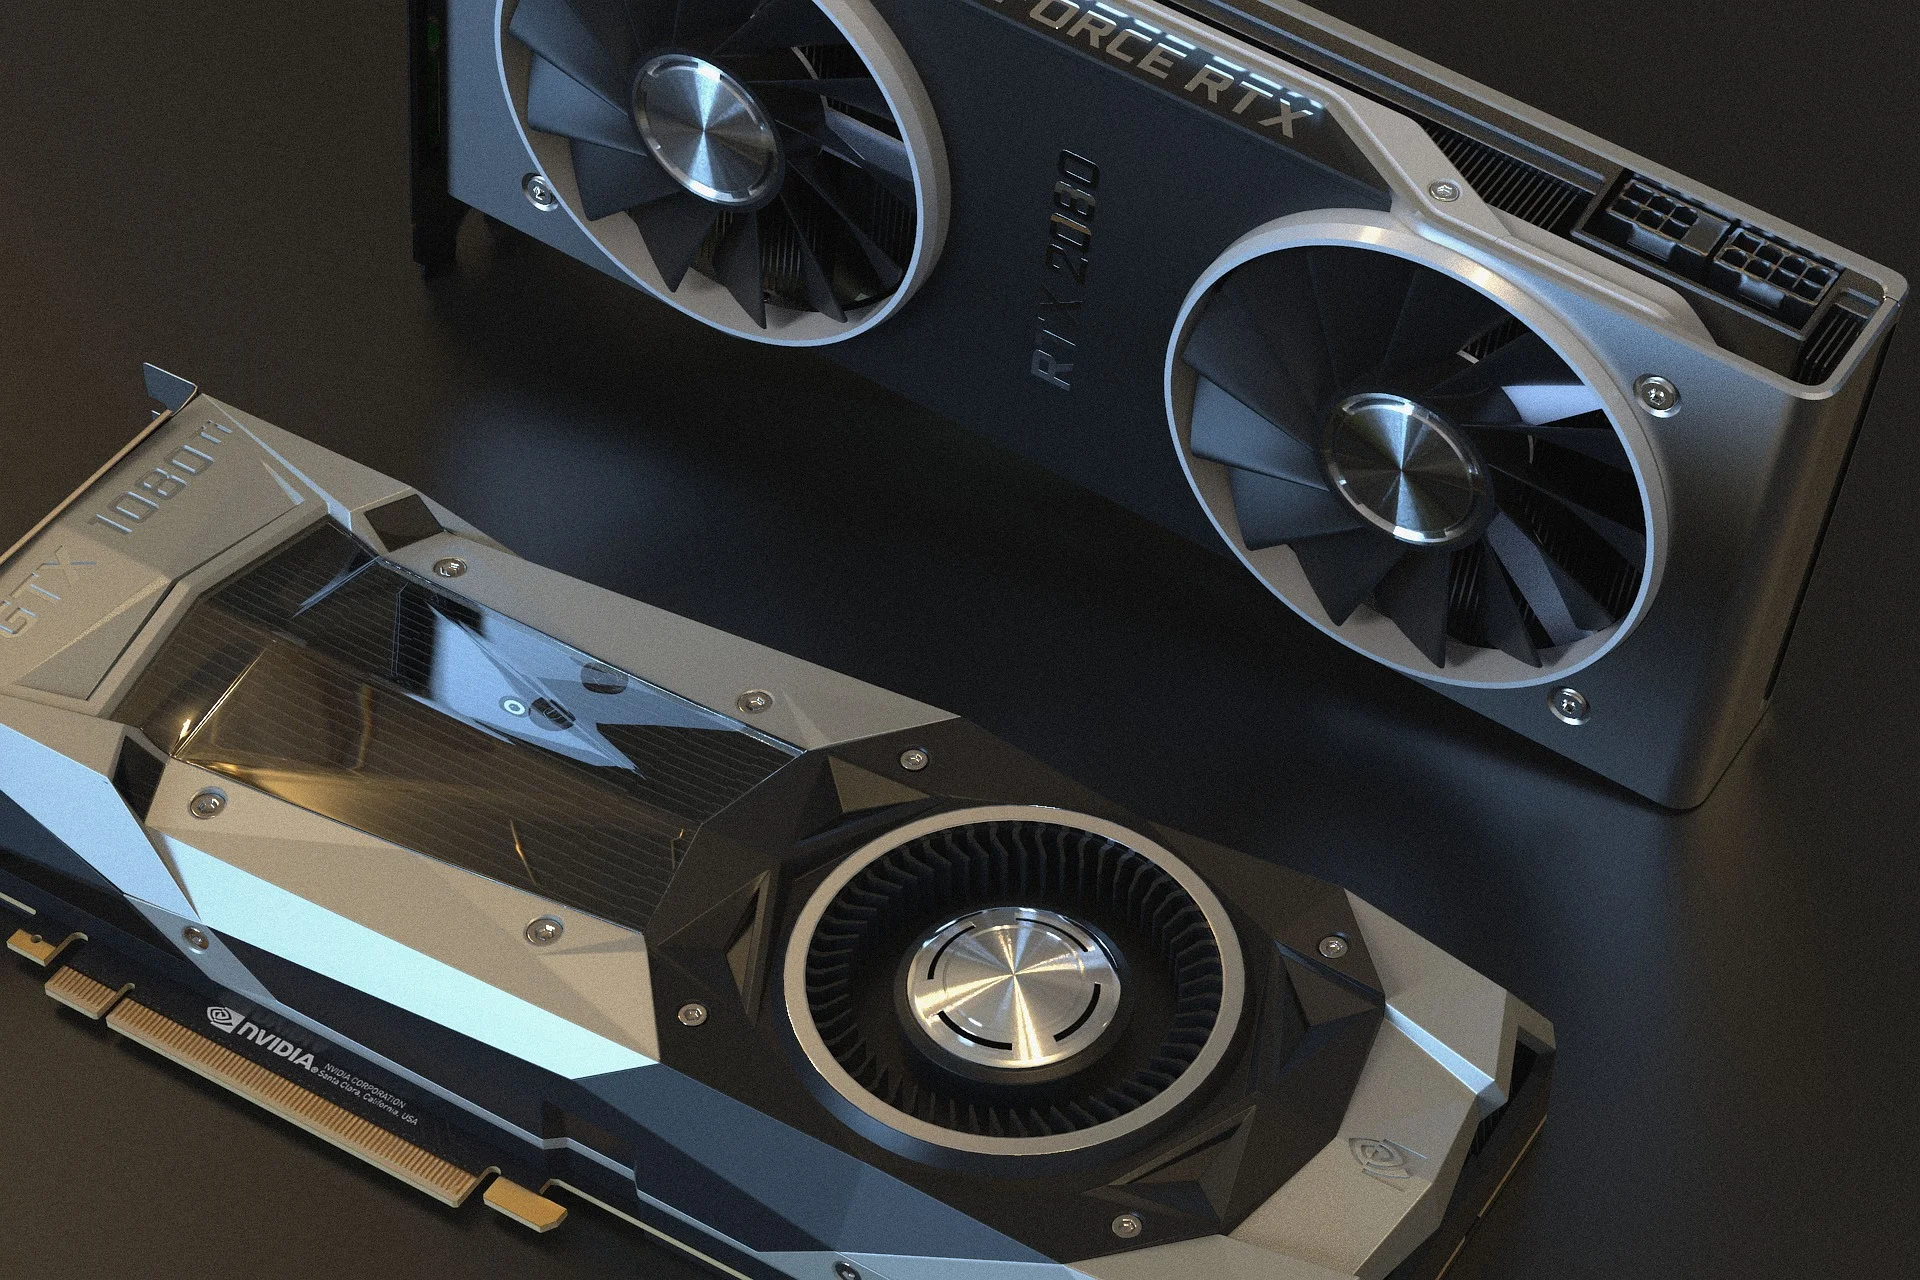 Most Expensive Graphics Cards